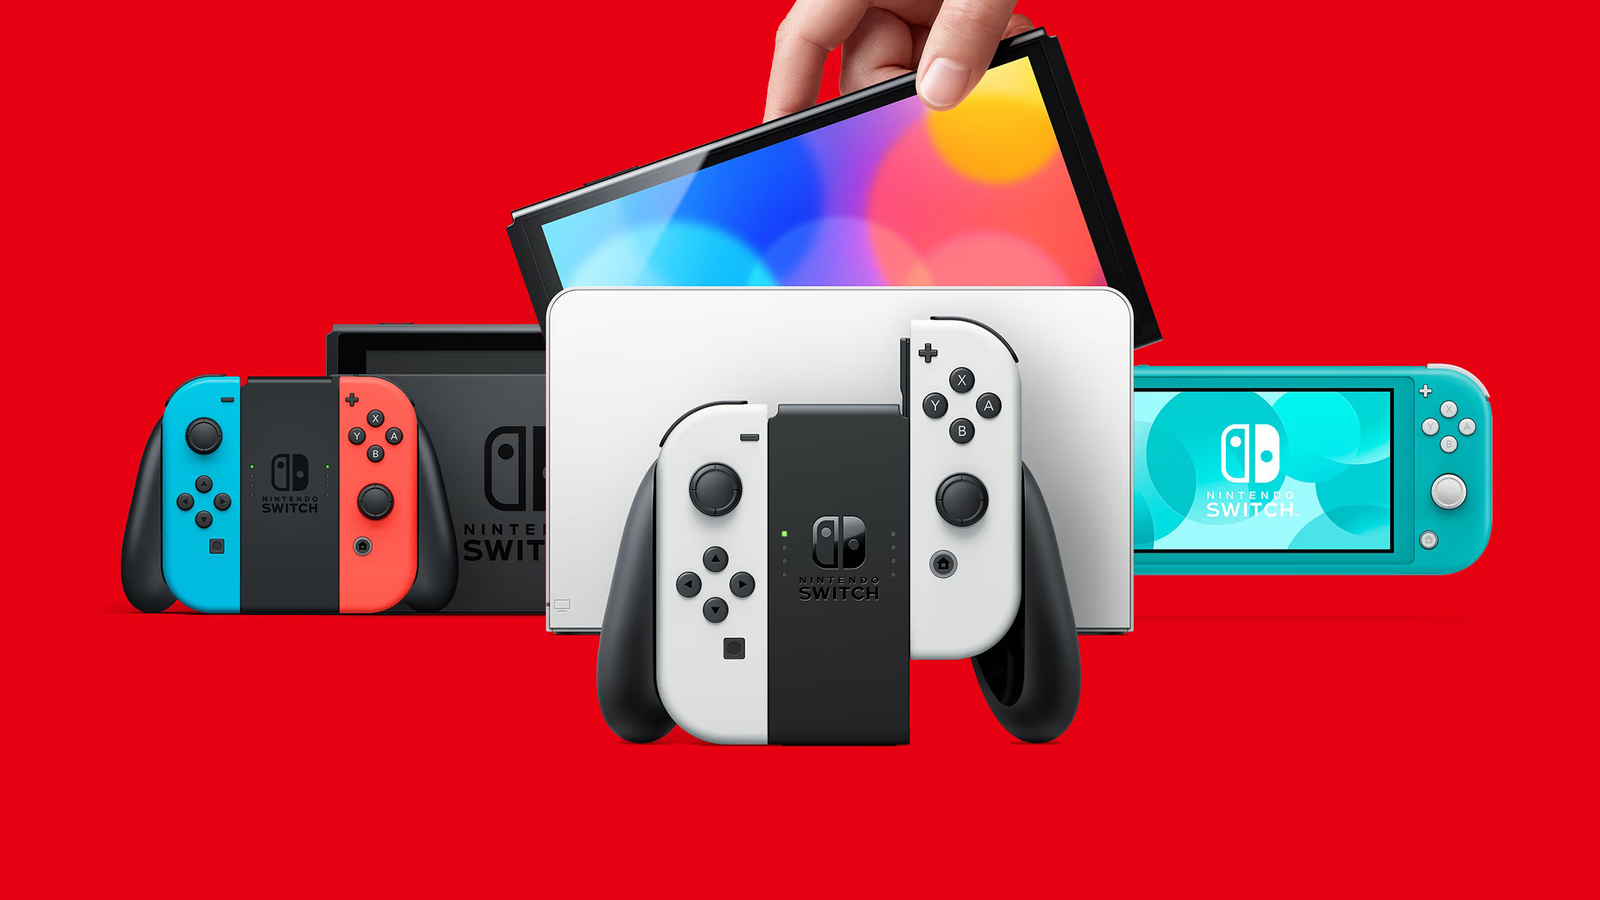 Nintendo Switch OLED in 'Mario Red' Coming Oct. 6 - CNET